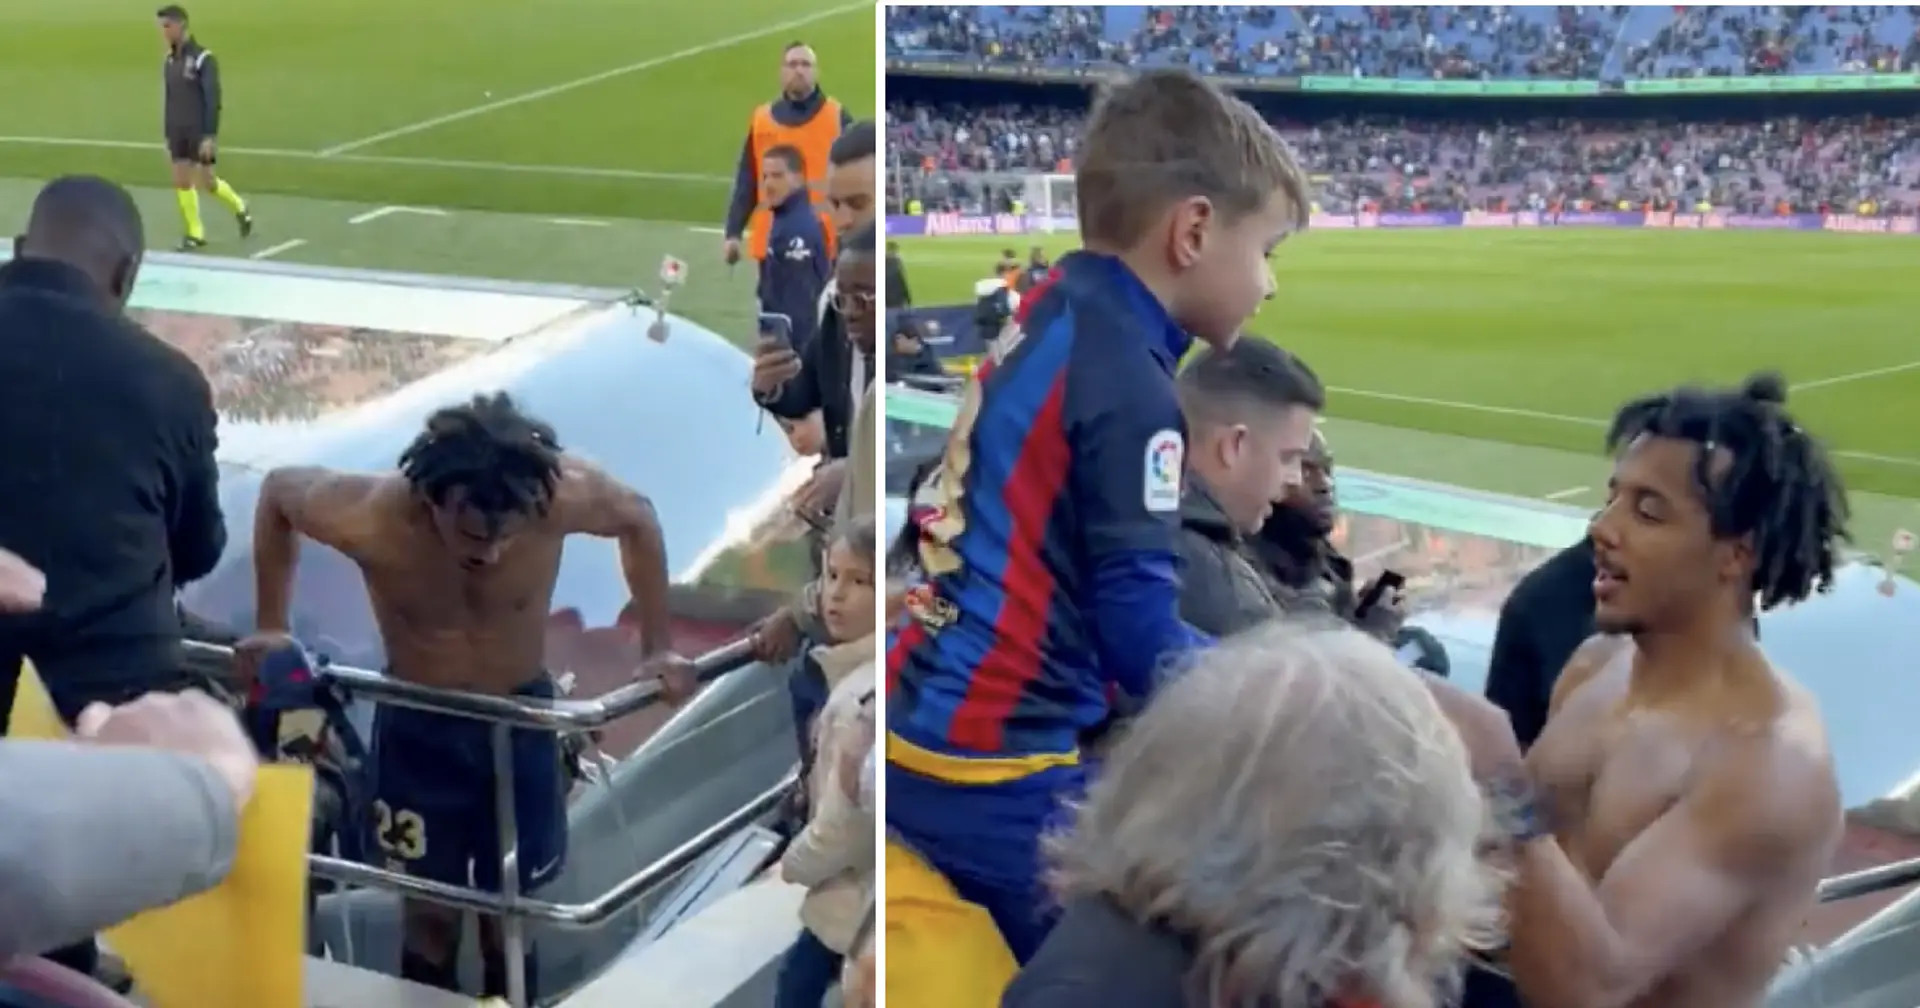 Spotted: Kounde jumps into Camp Nou stands to hand young fan jersey -- he rode 400 km for it